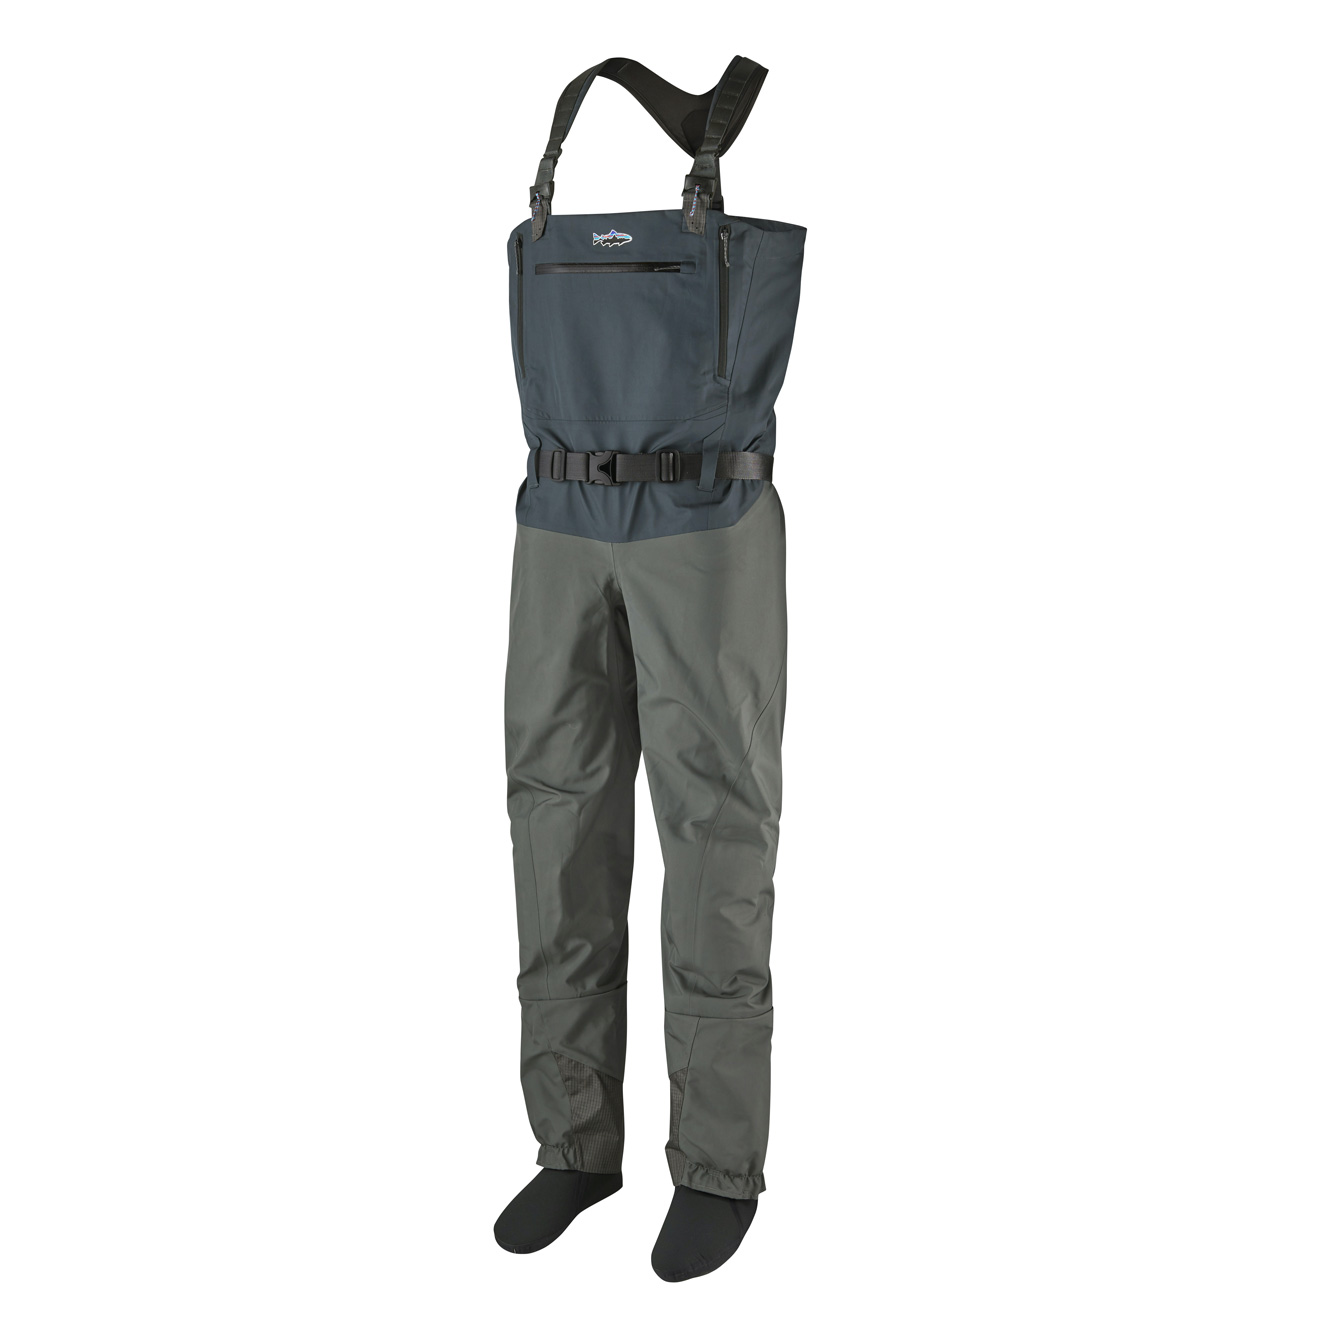 Patagonia Men's Swiftcurrent Expedition Wader - MXM